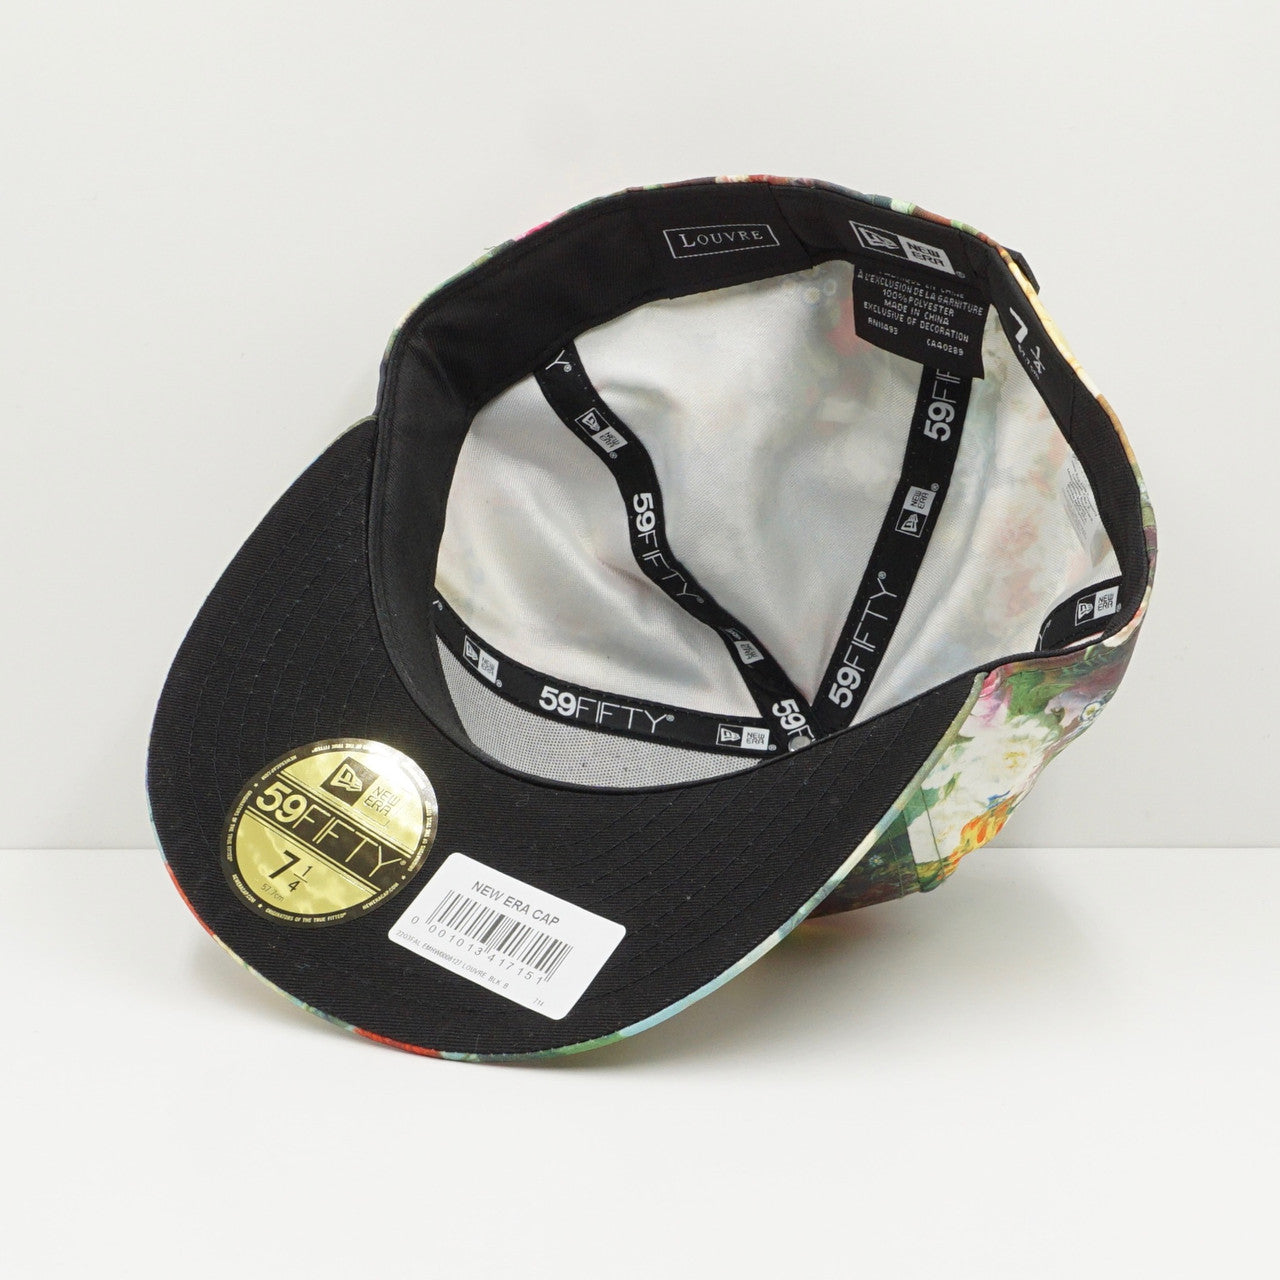 New Era Le Louvre Flower Fitted Cap